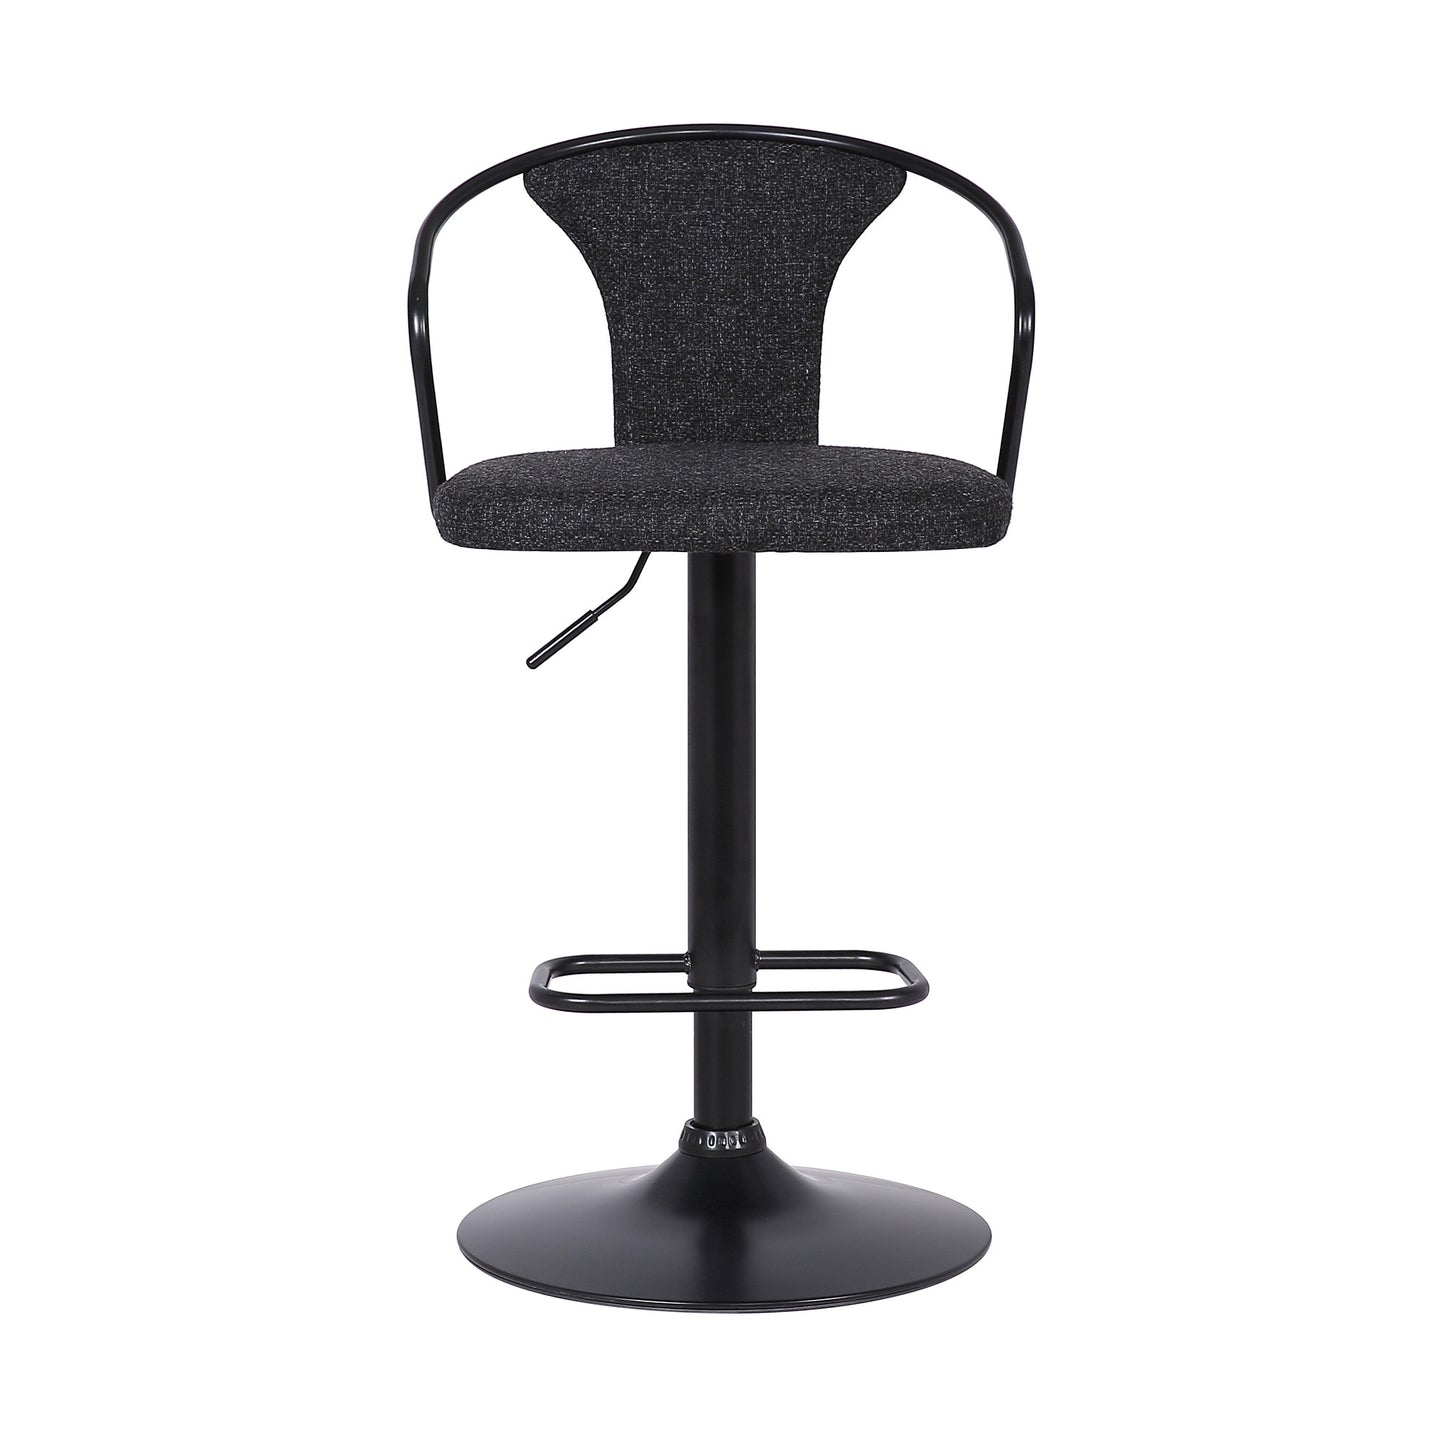 43" Black Faux Leather and Metal Adjustable Height Bar Chair